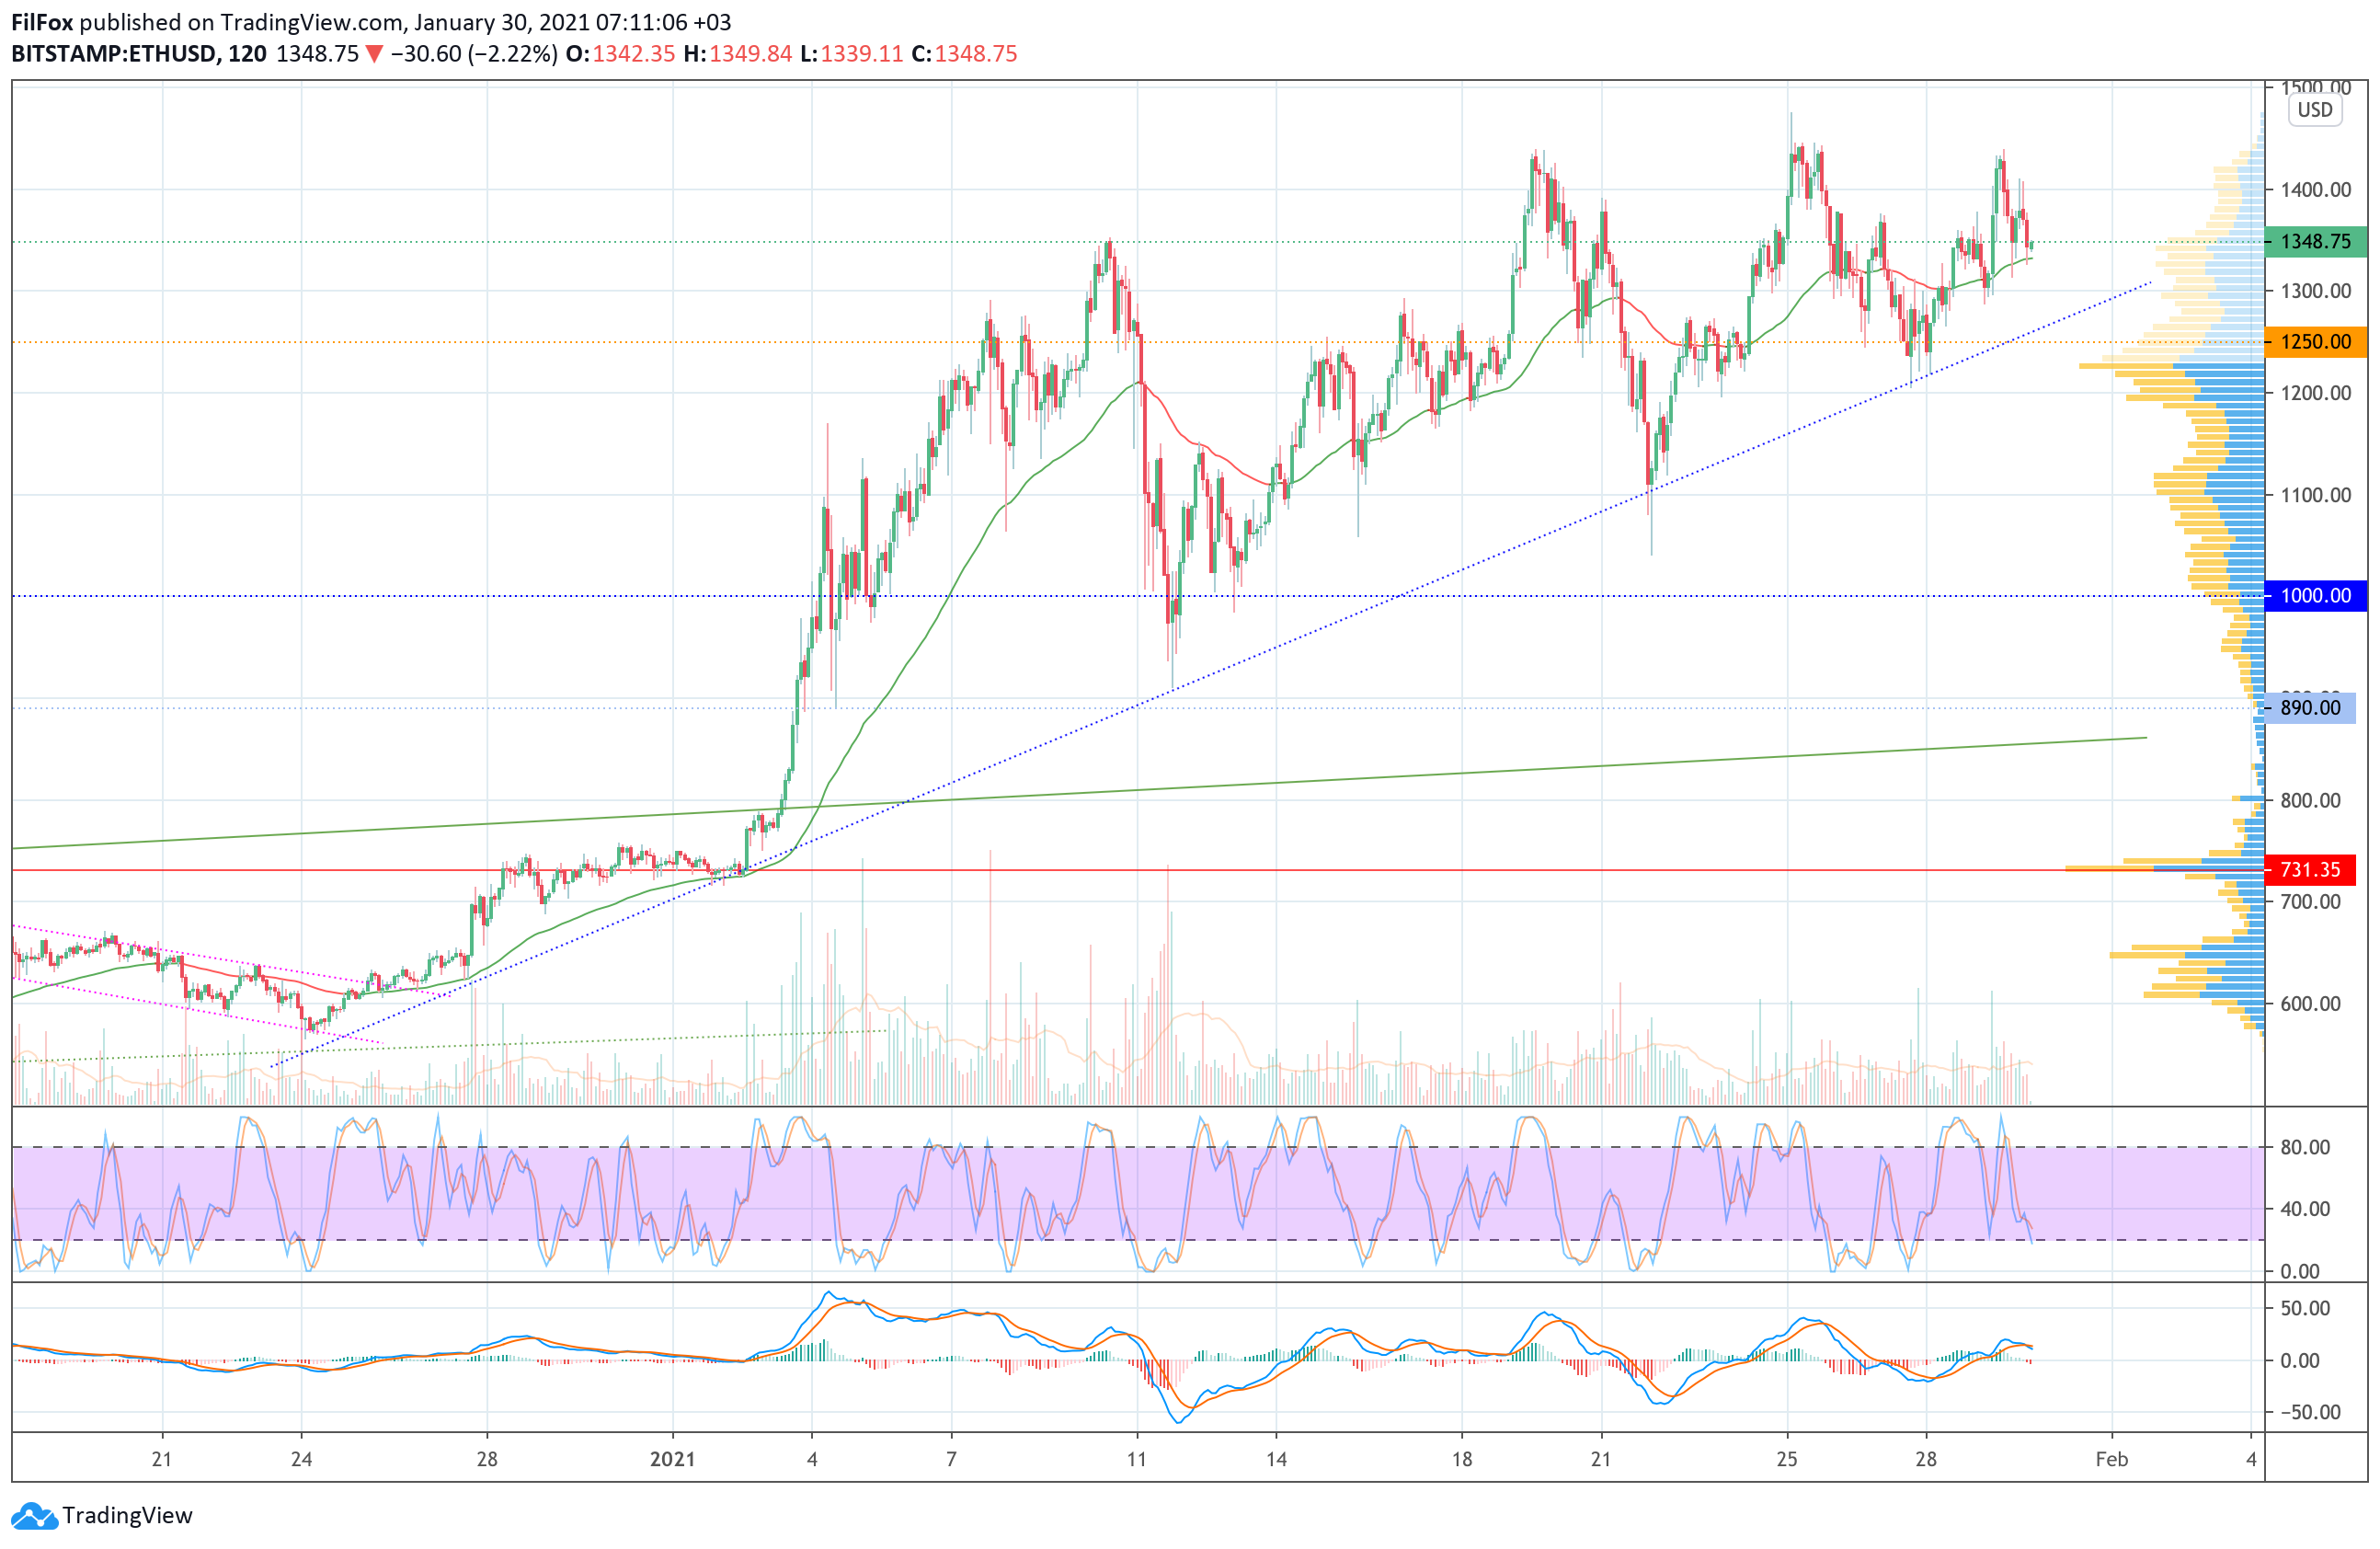 Analysis of prices for Bitcoin, Ethereum, Ripple for 01/30/2021